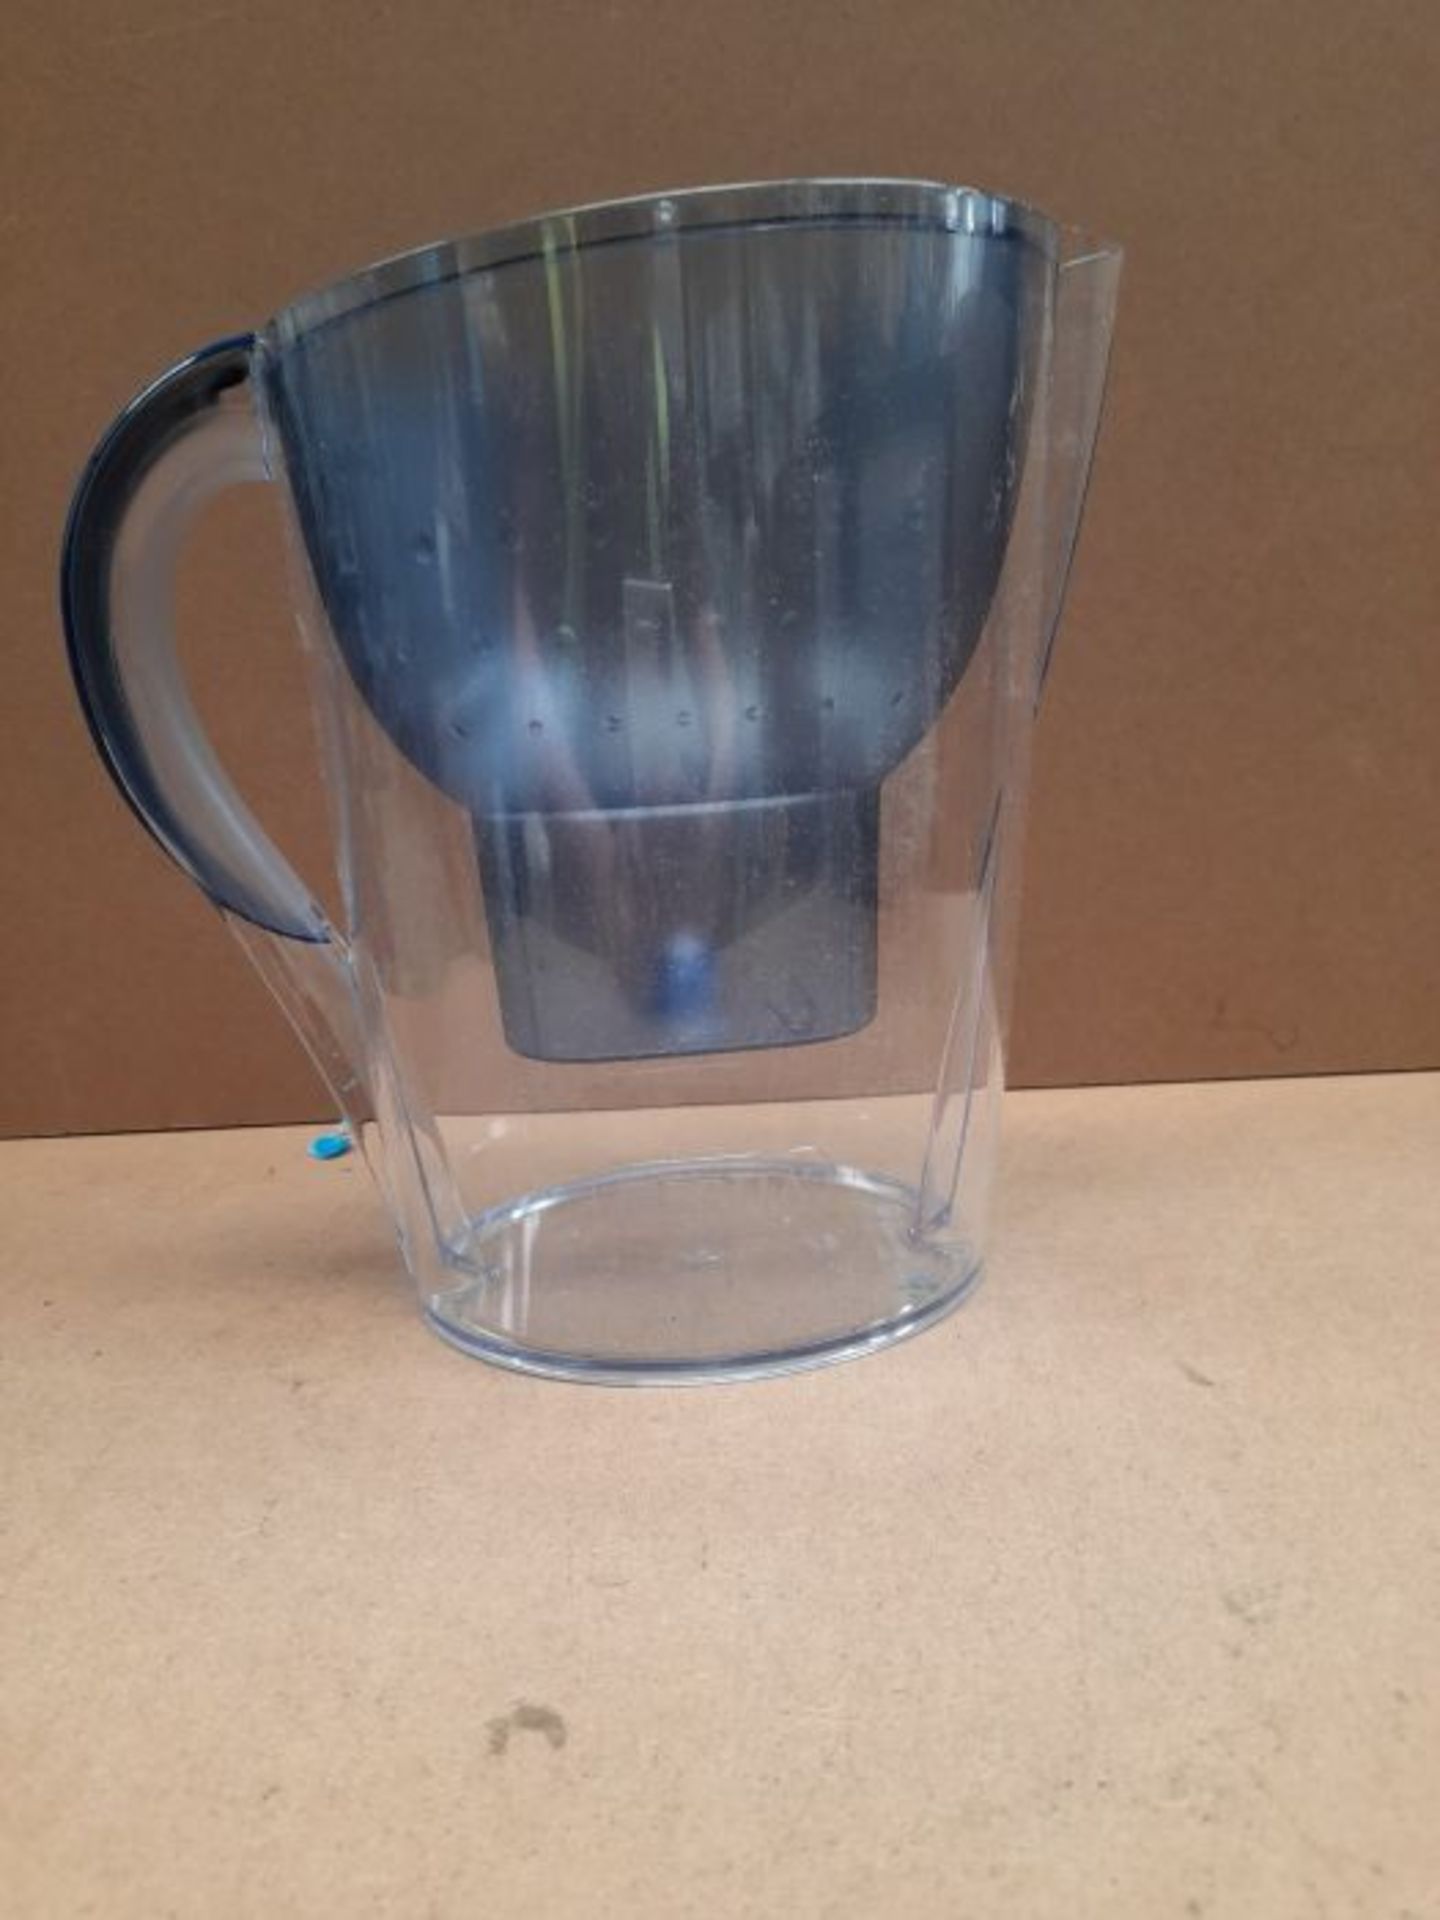 [INCOMPLETE] BRITA Marella XL water filter jug for reduction of chlorine, limescale an - Image 2 of 2